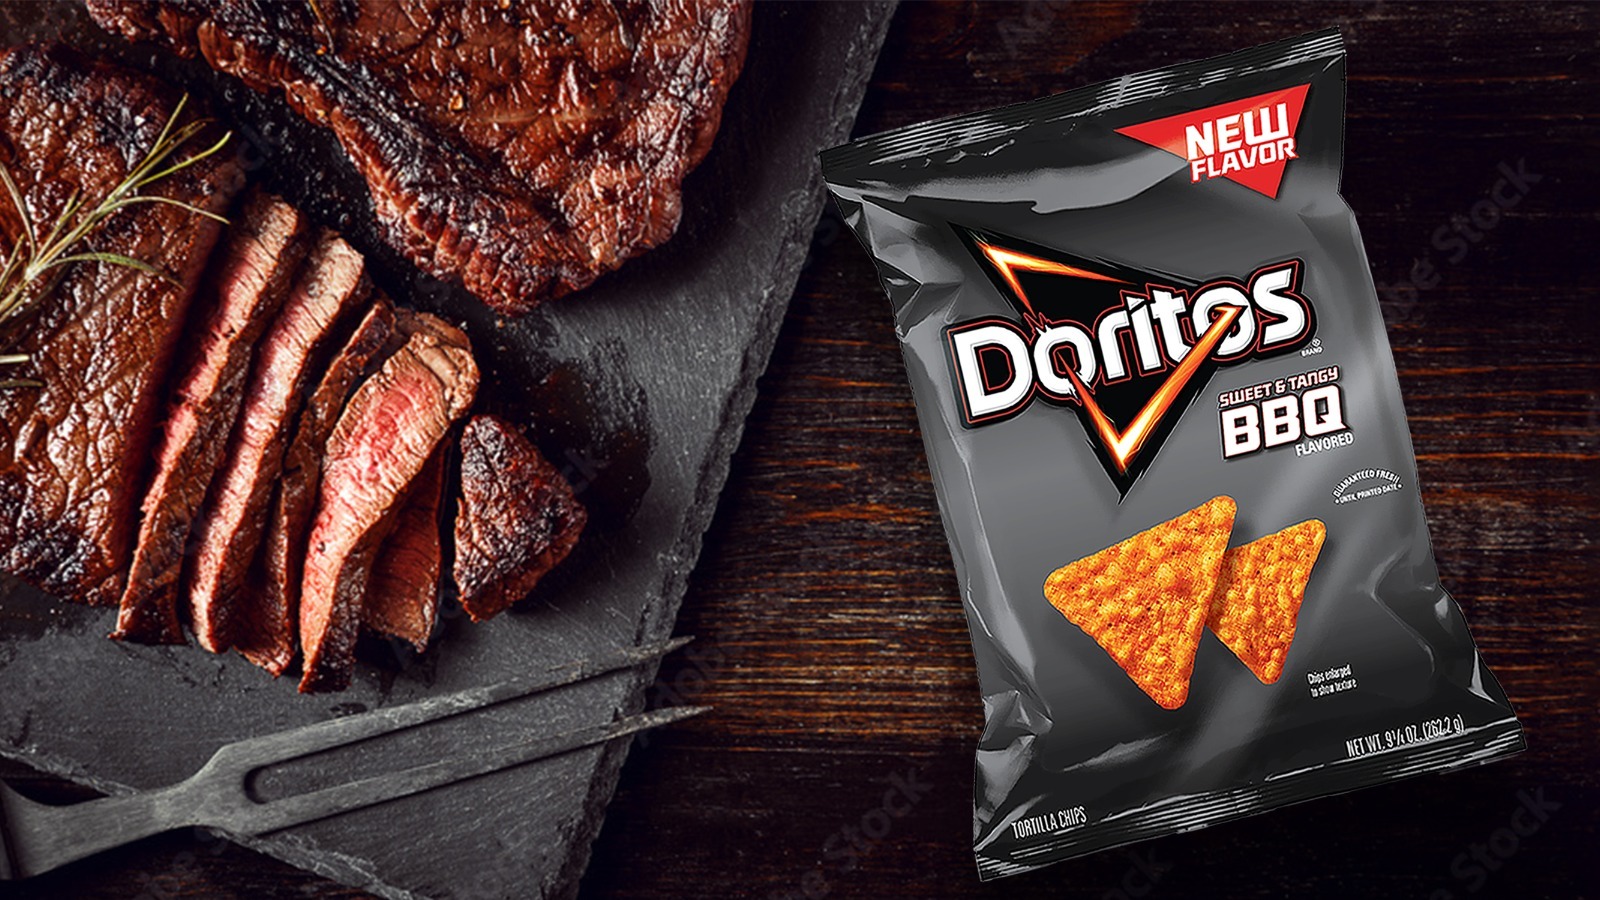 Doritos Just Announced A Bold New BBQ Flavor For 2023